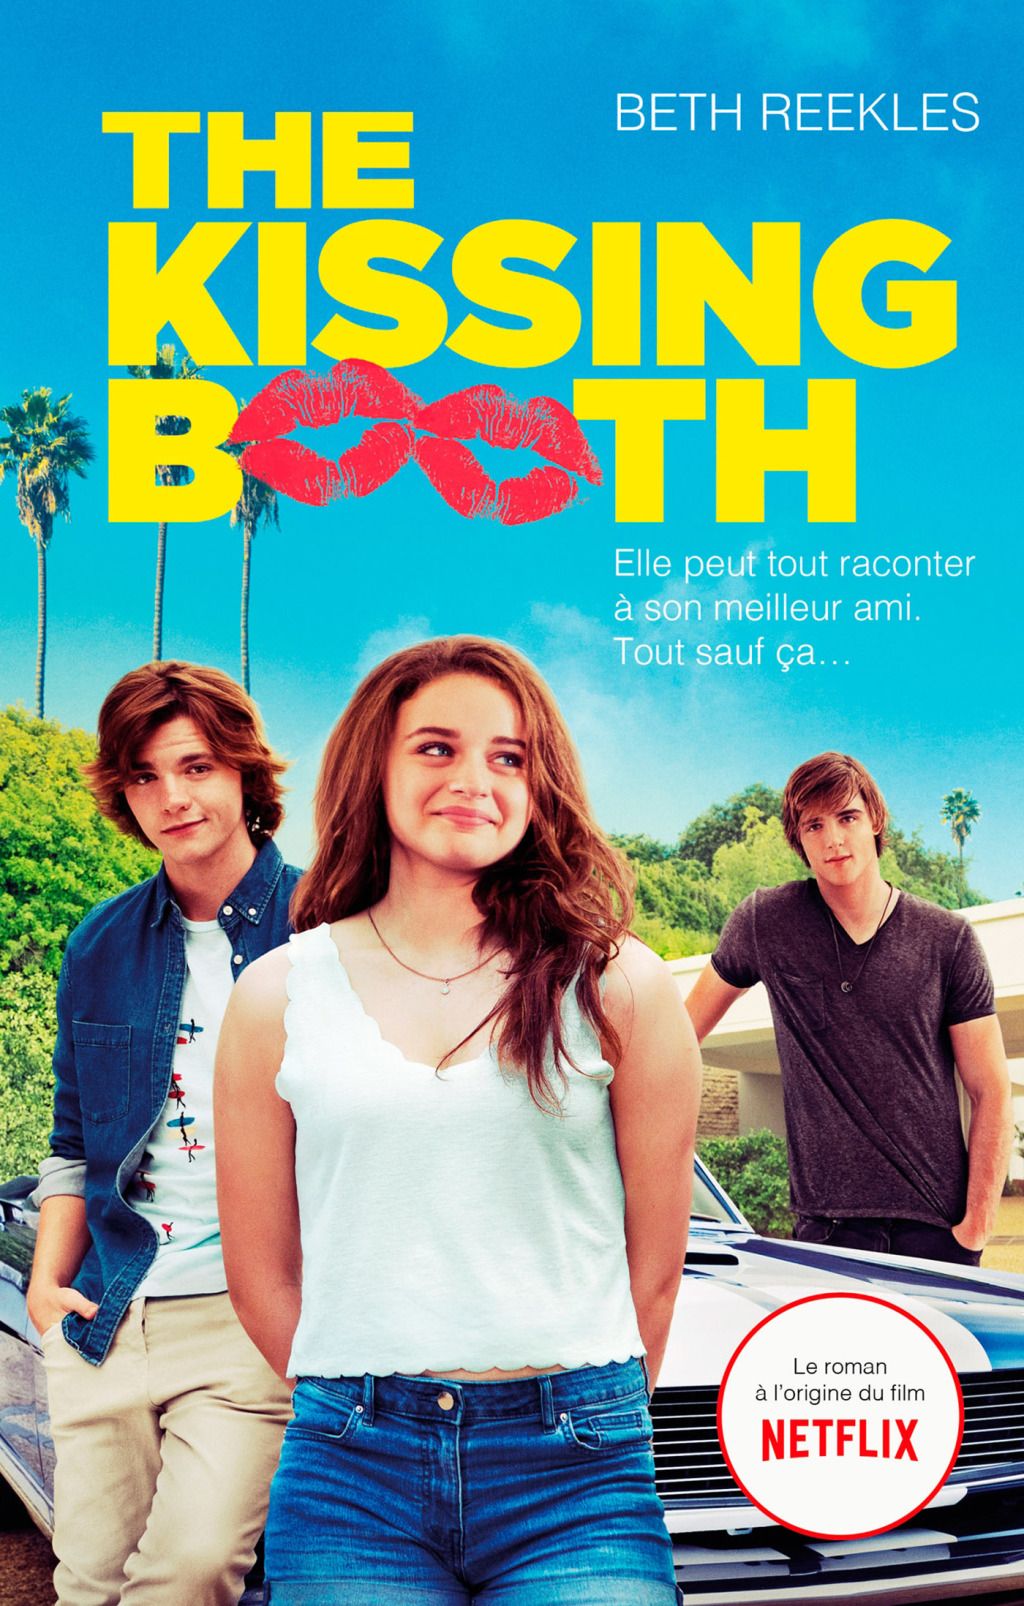 THE KISSING BOOTH FILM